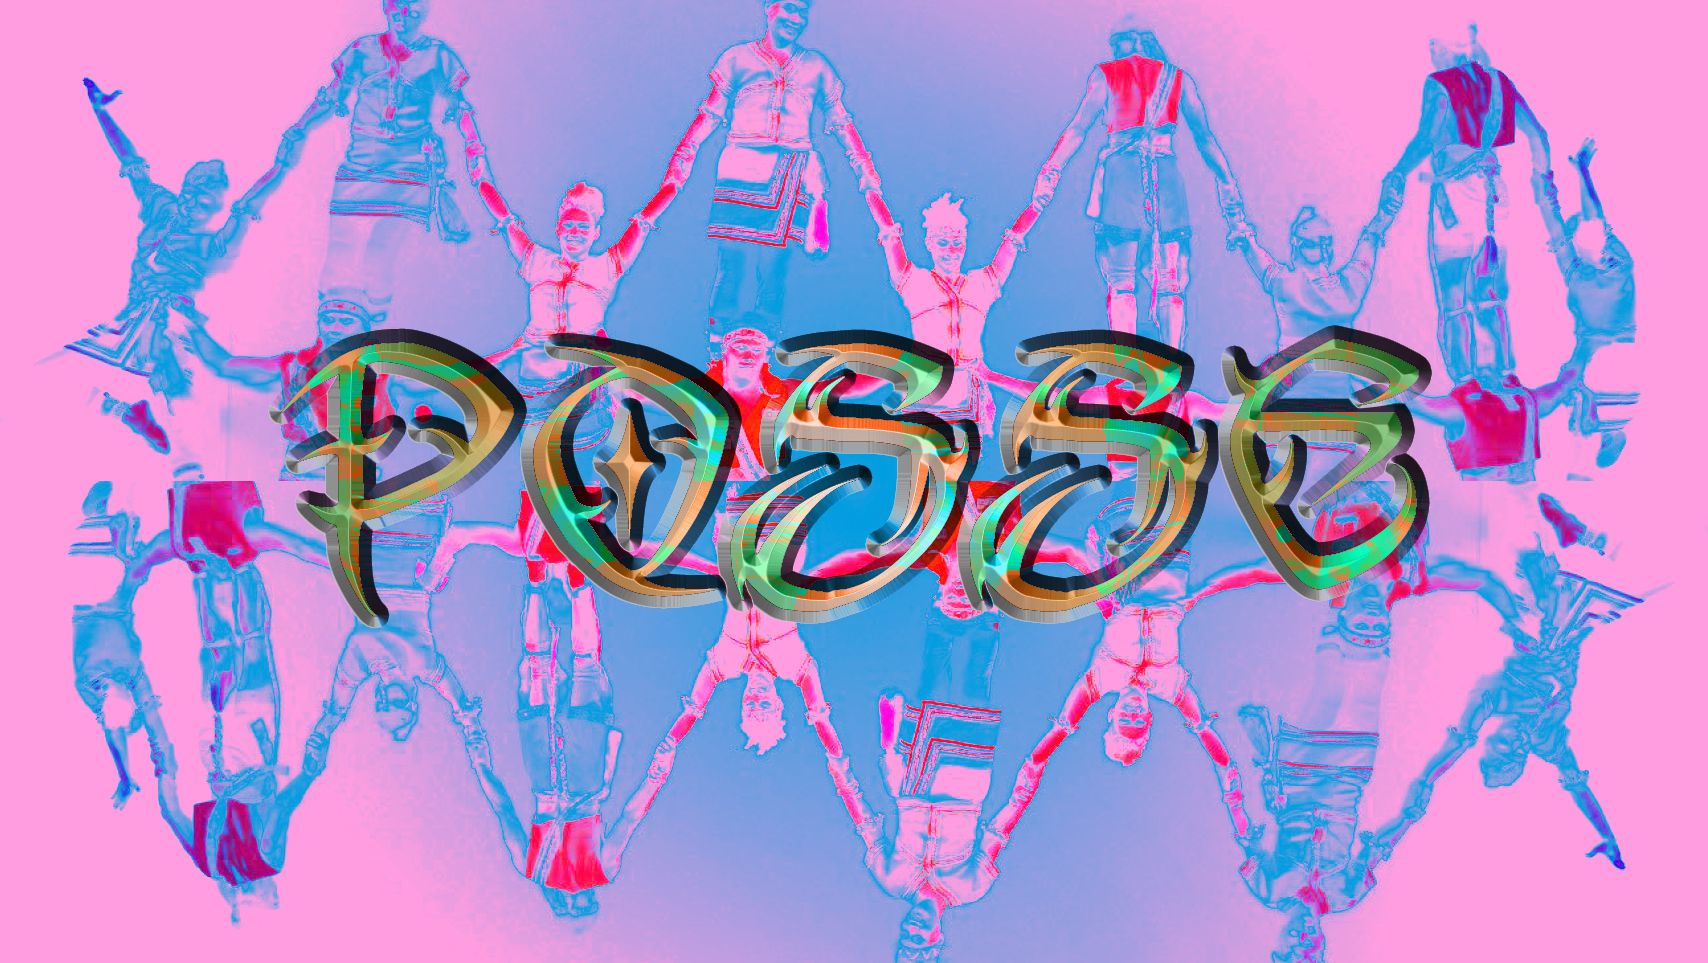 A pink and blue image of several people holding hands behind the word "P0$$€" in large, capital letters